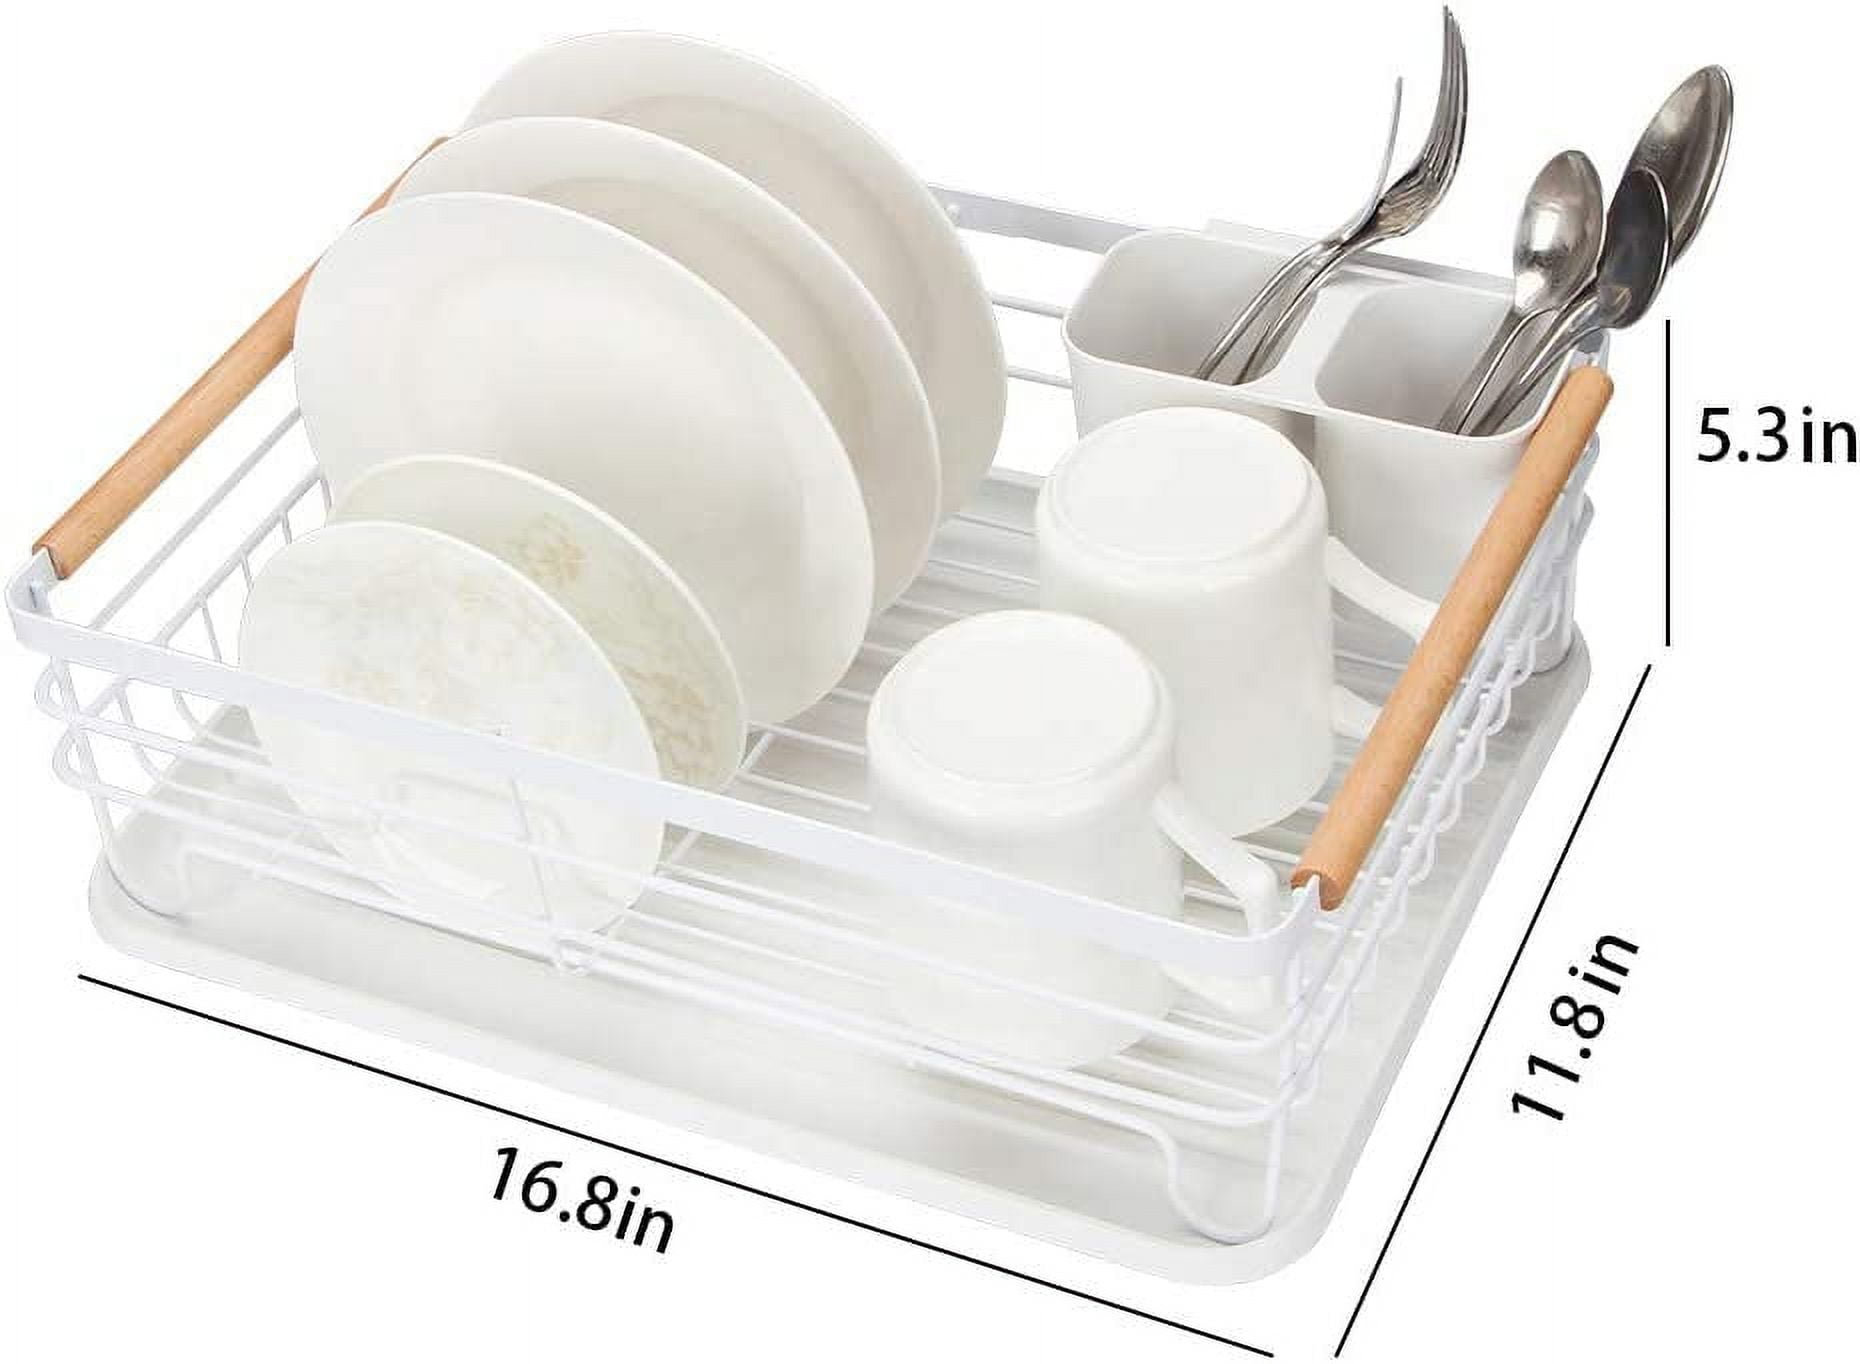 uyoyous Dish Drying Rack Compact Dish Rack and Drainboard Set, Dish Drainer Kitchen Countertop Organizer White, Size: 16.92 x 12 x 5.51